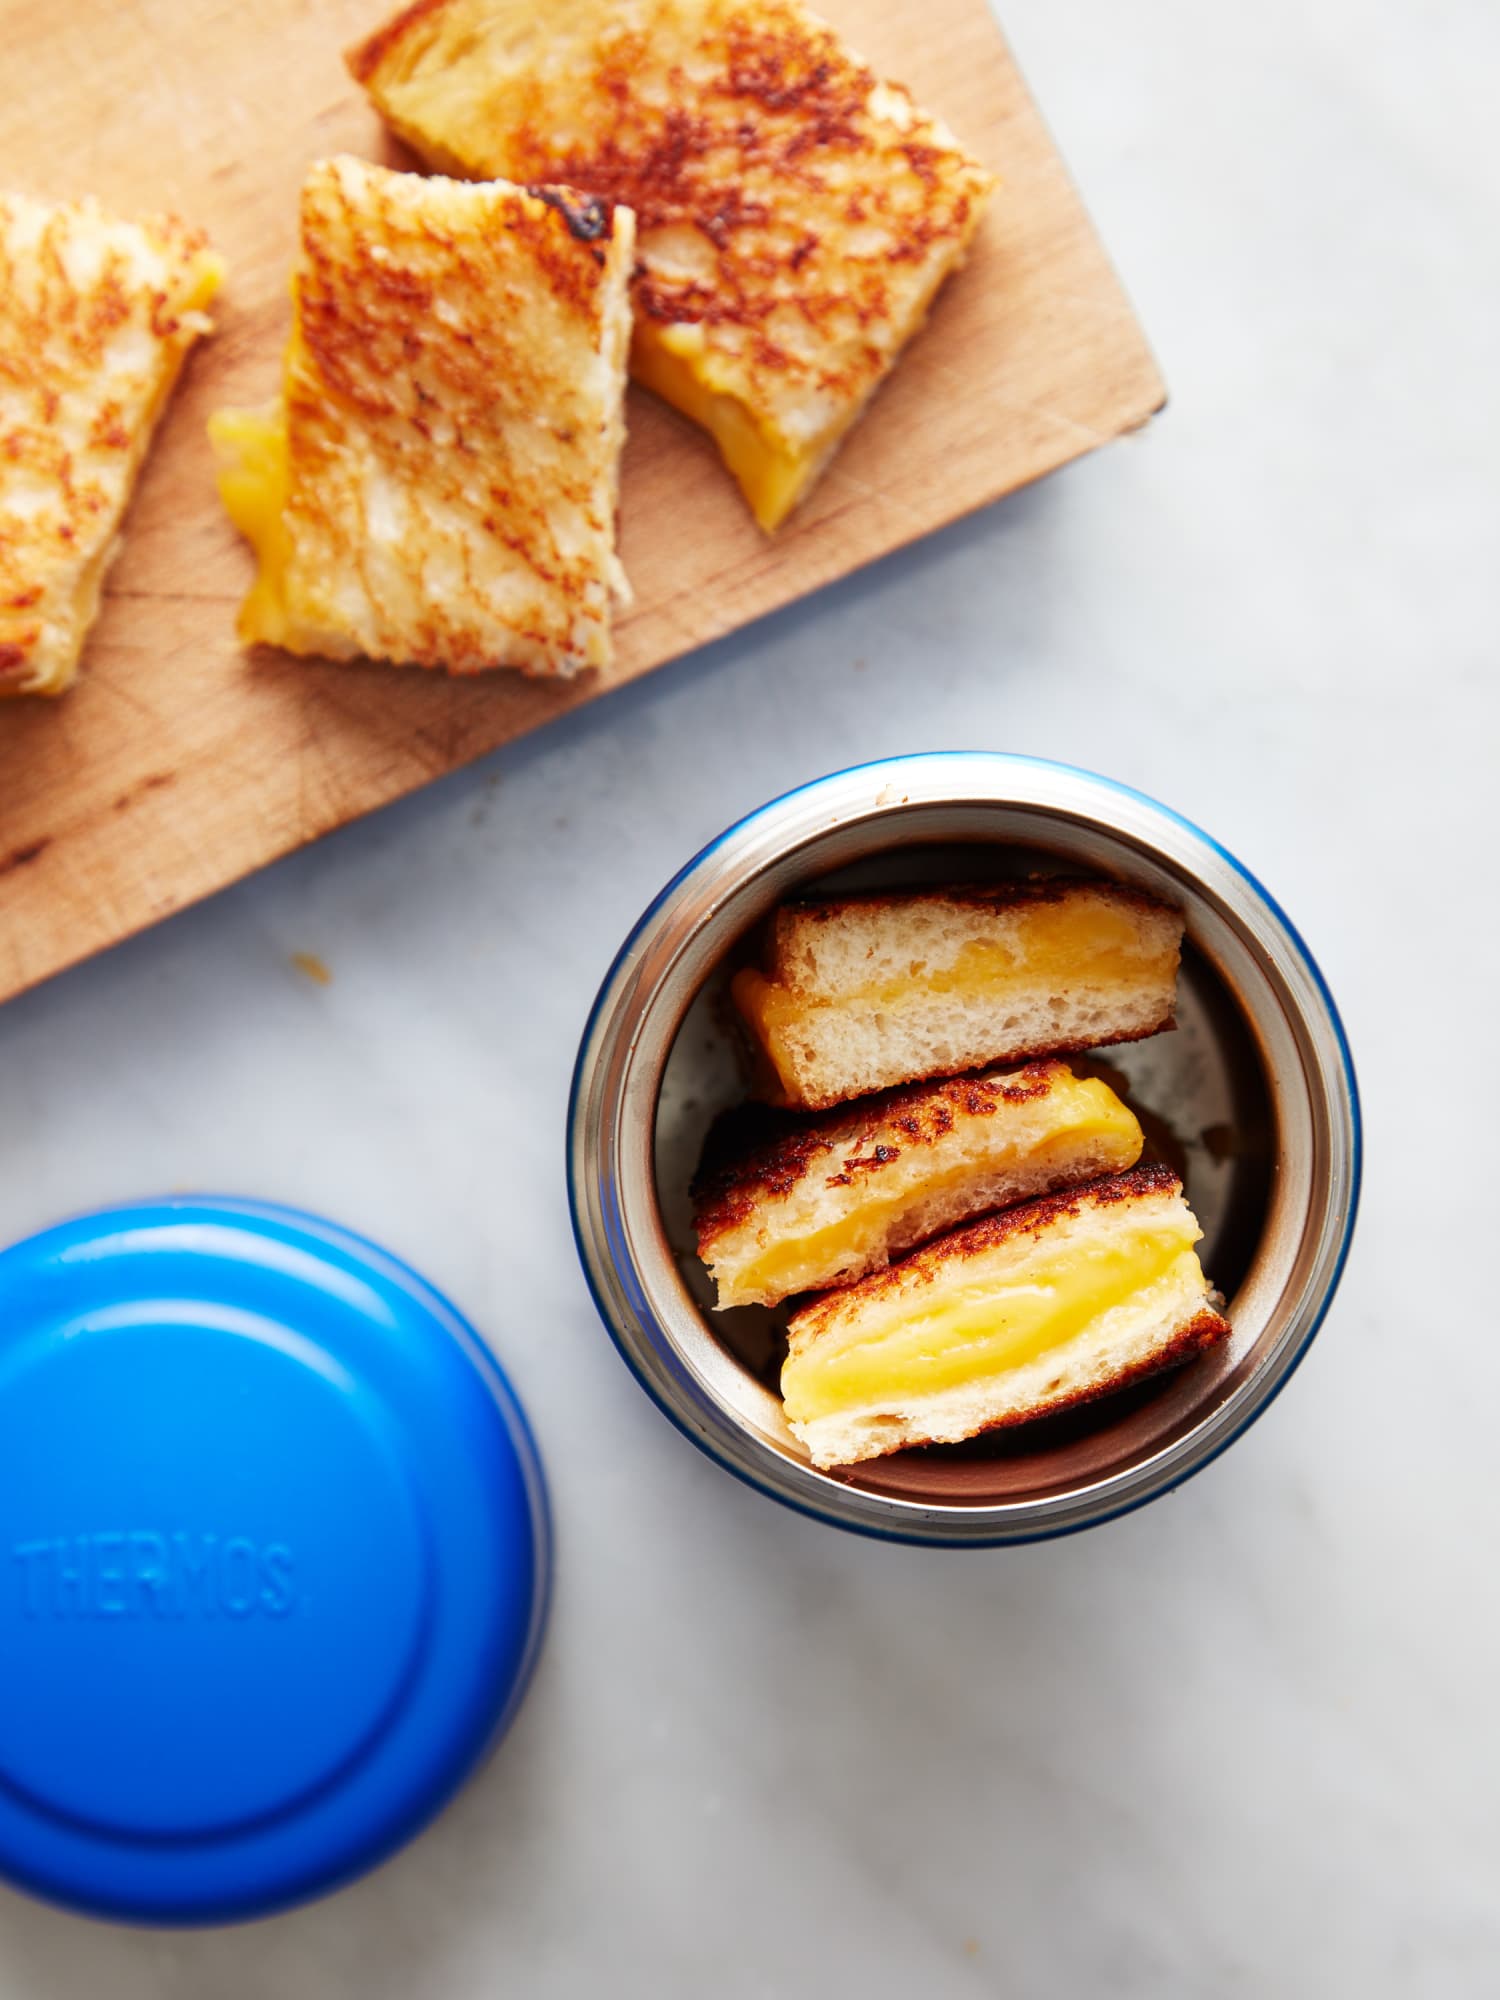 15 Things to Pack in Your Thermos for a Hot Lunch (Besides Soup)